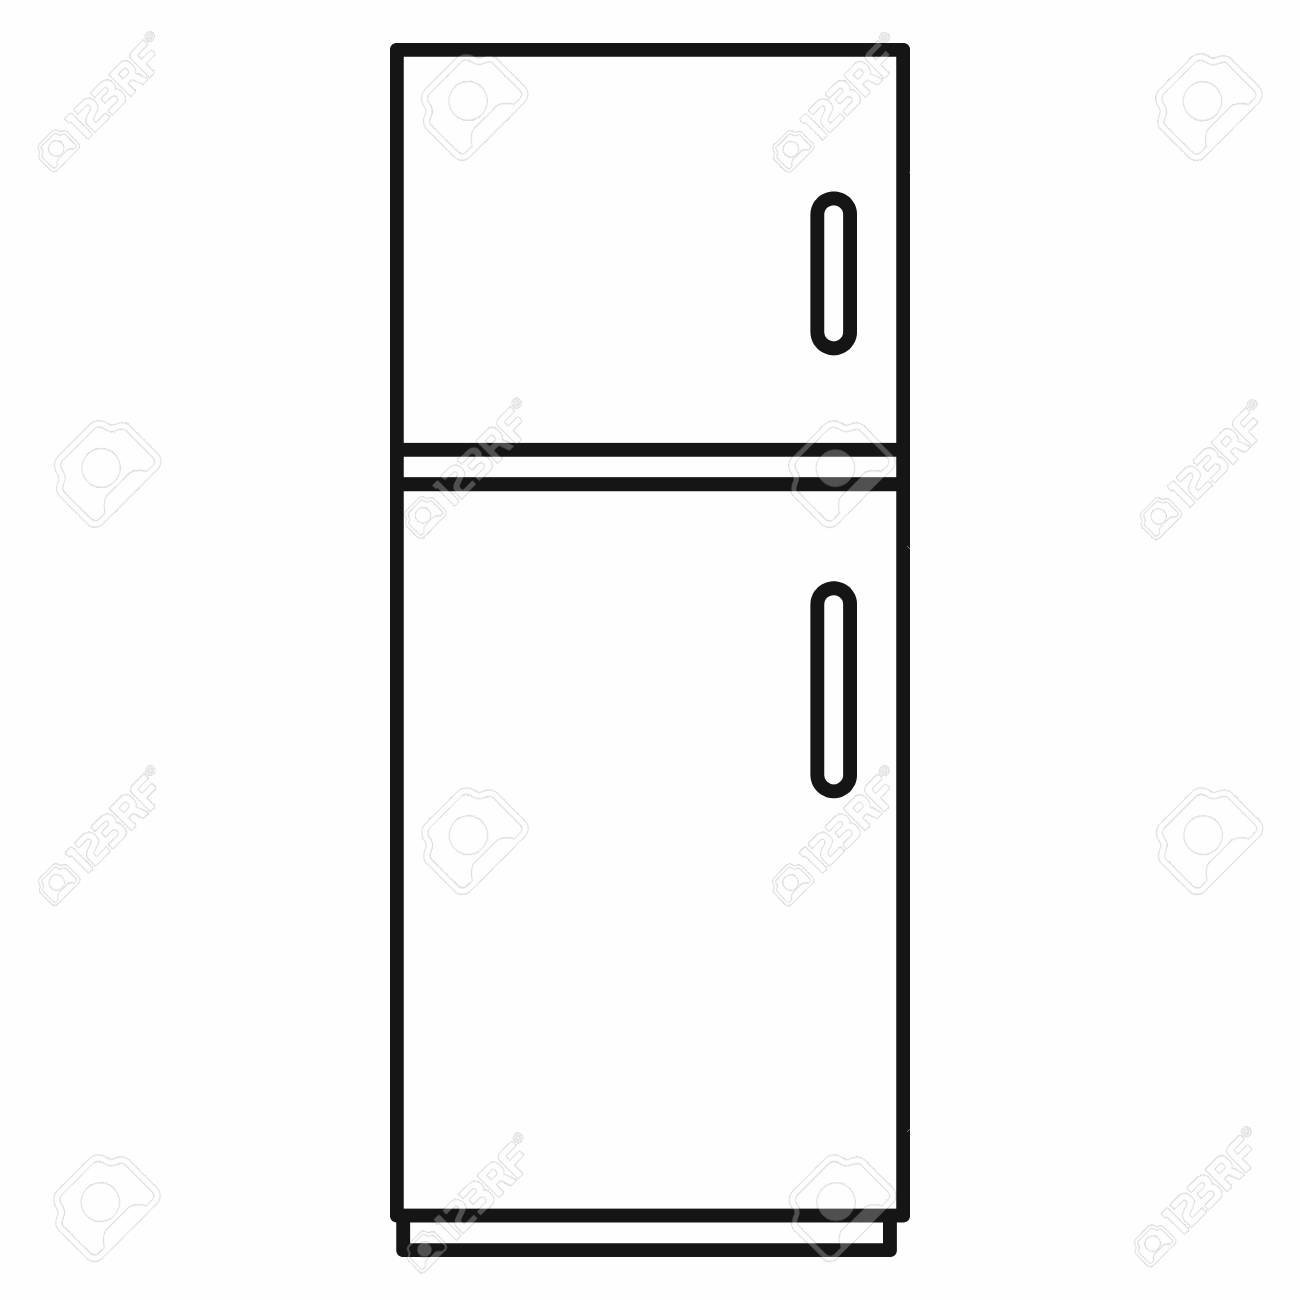 Refrigerator Icon In Outline Style Isolated On White Background